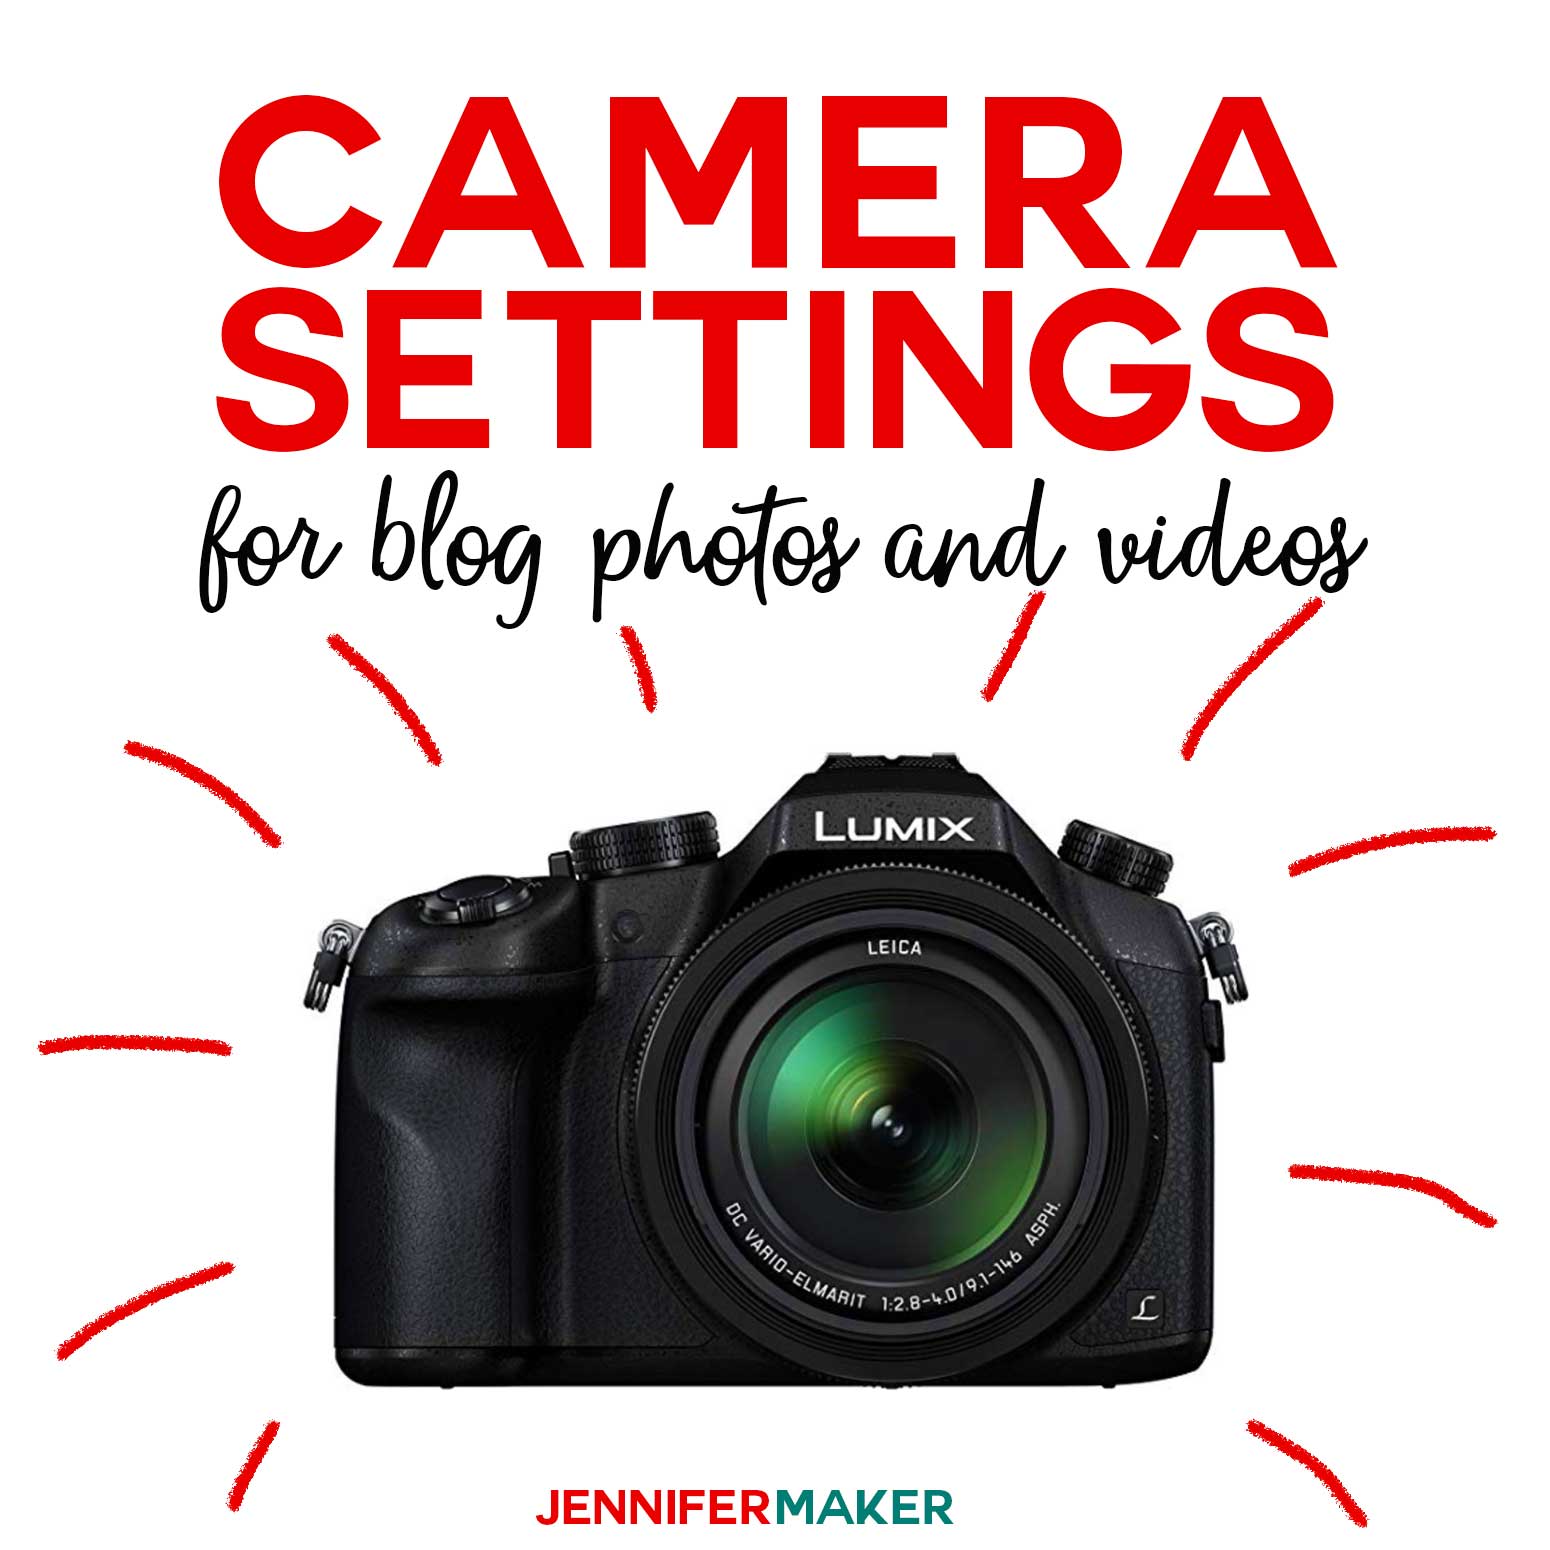 Camera Settings for Blog Photos and Videos